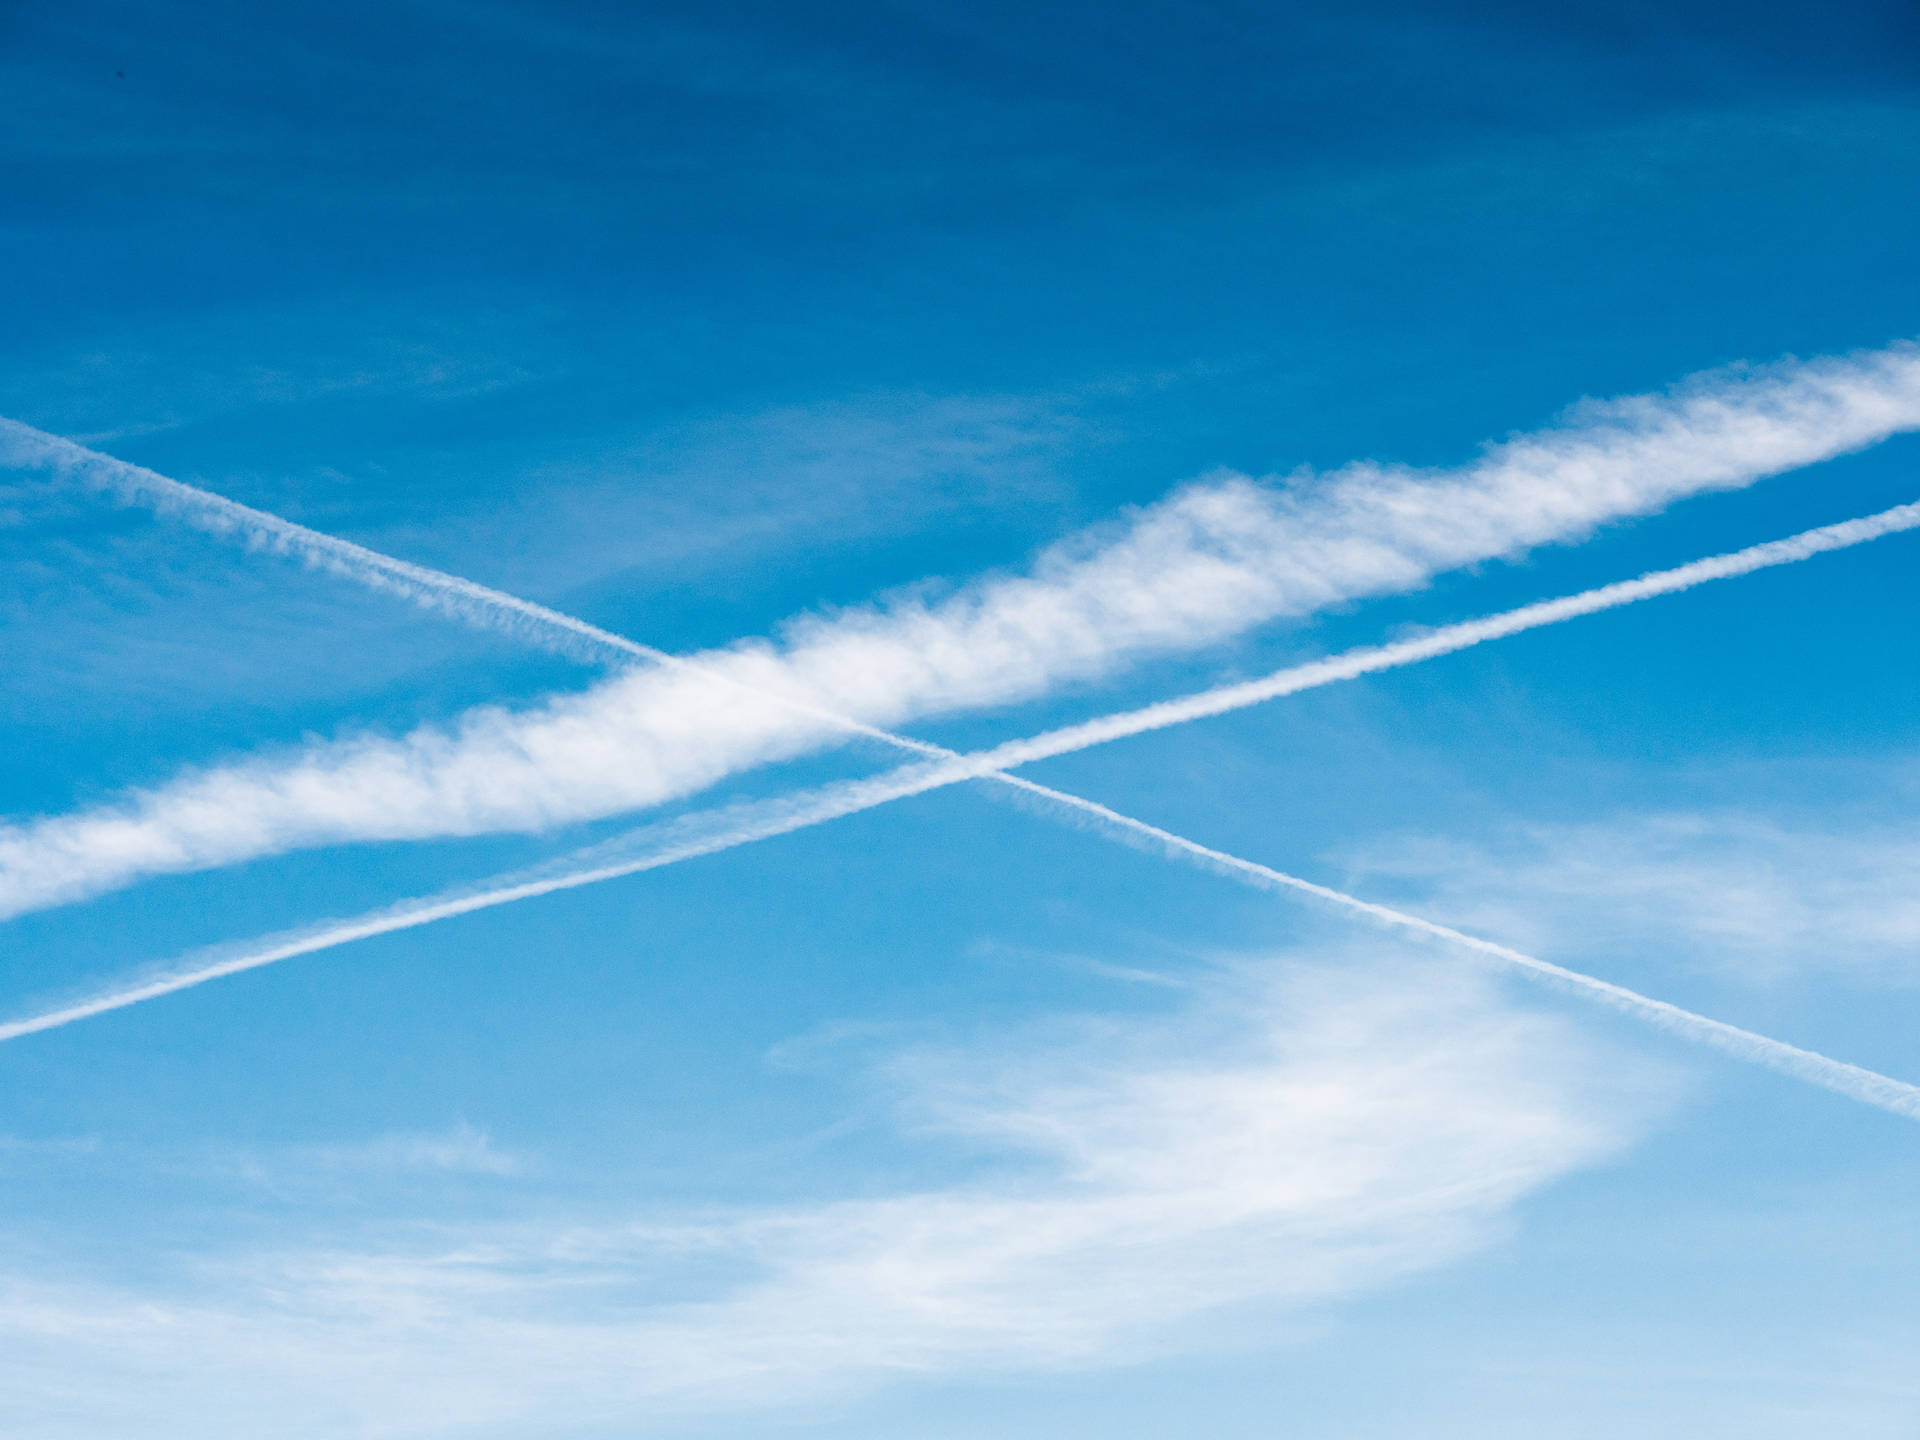 Plane Contrails In Azure Sky Background